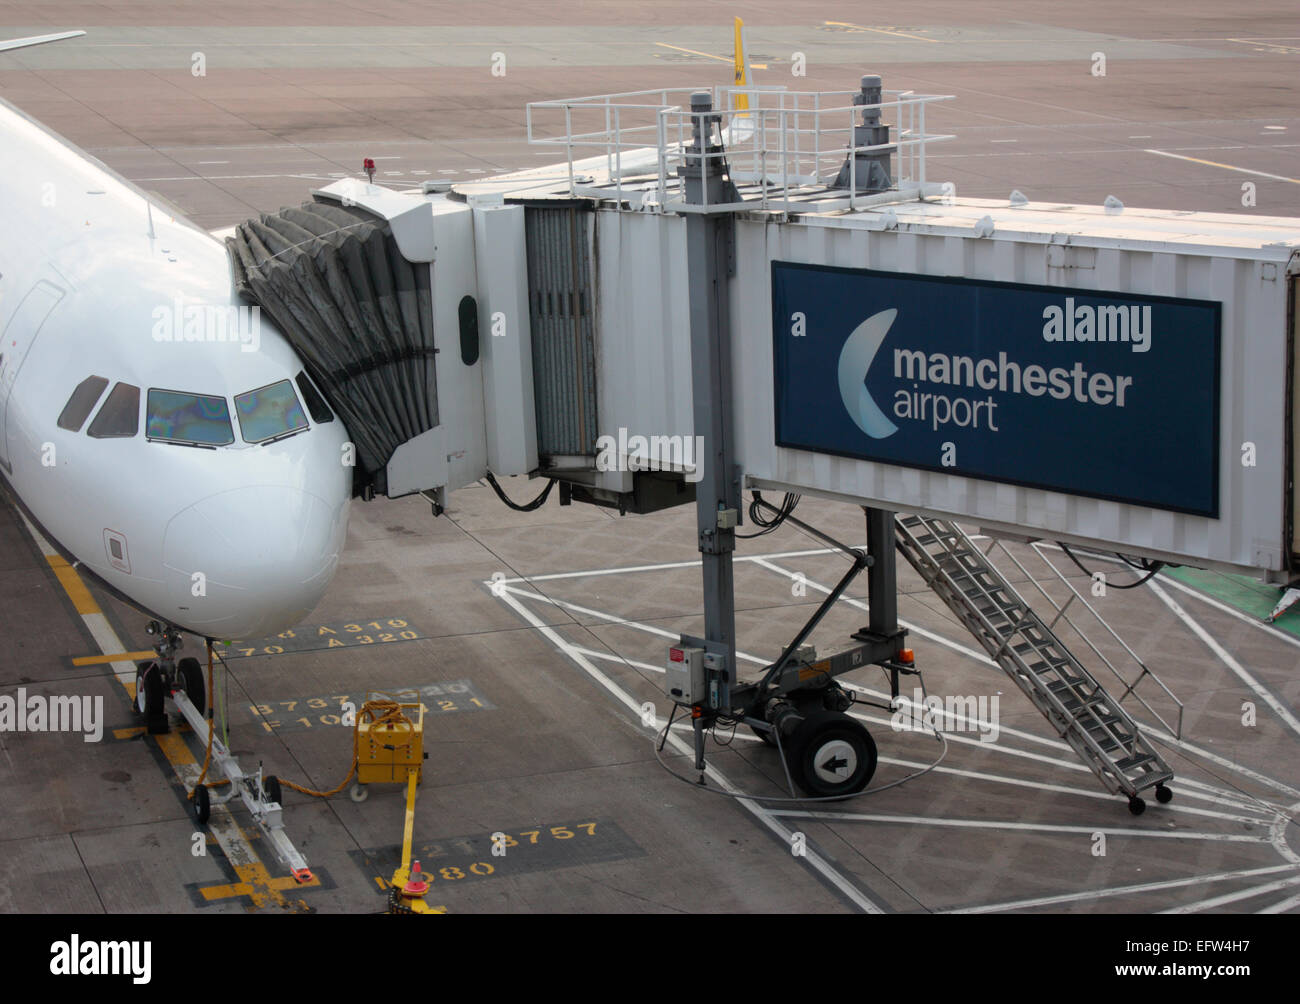 Civil aviation. Commercial air transport. Passenger jet plane connected to its jetbridge on the ramp or apron at Manchester Airport, UK Stock Photo